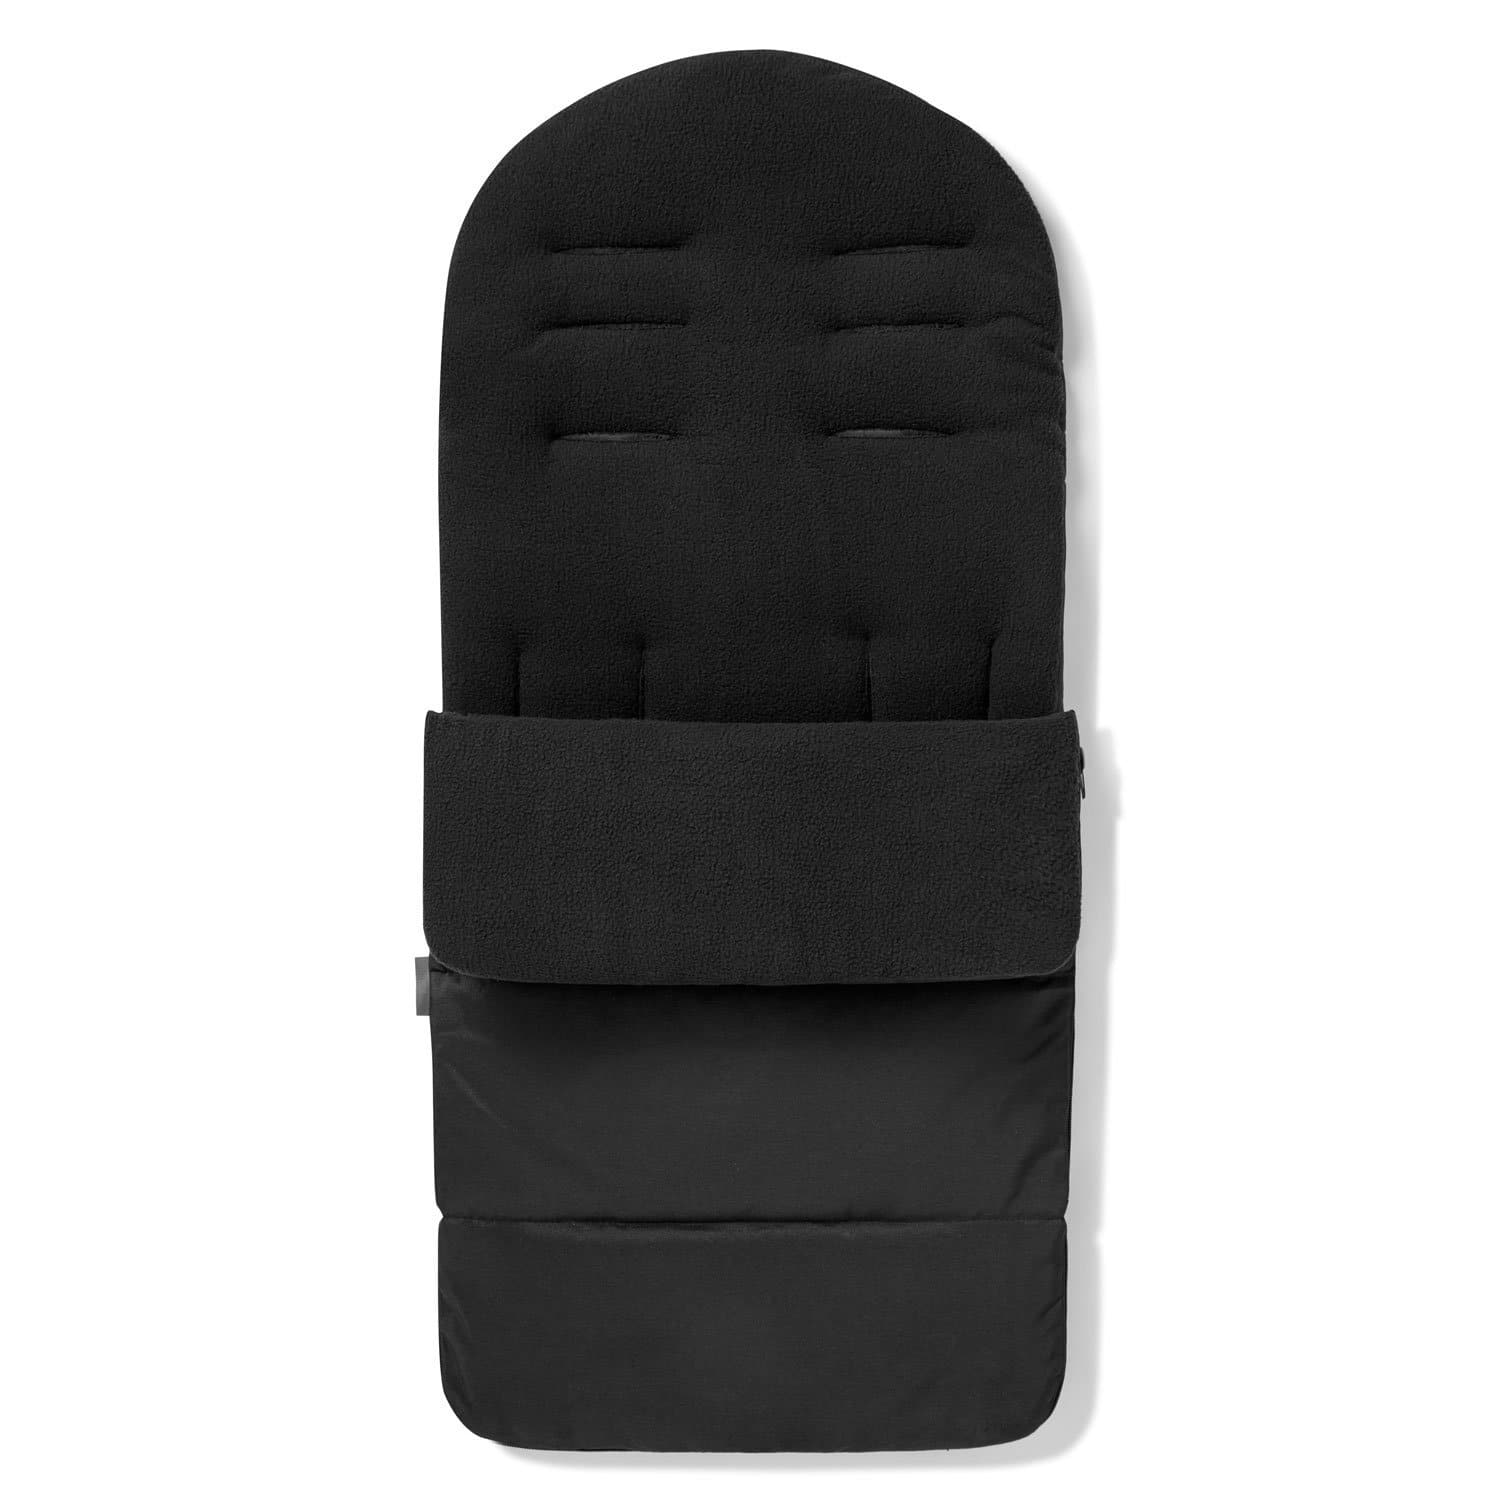 Premium Footmuff / Cosy Toes Compatible with Silver Cross - Black Jack / Fits All Models | For Your Little One